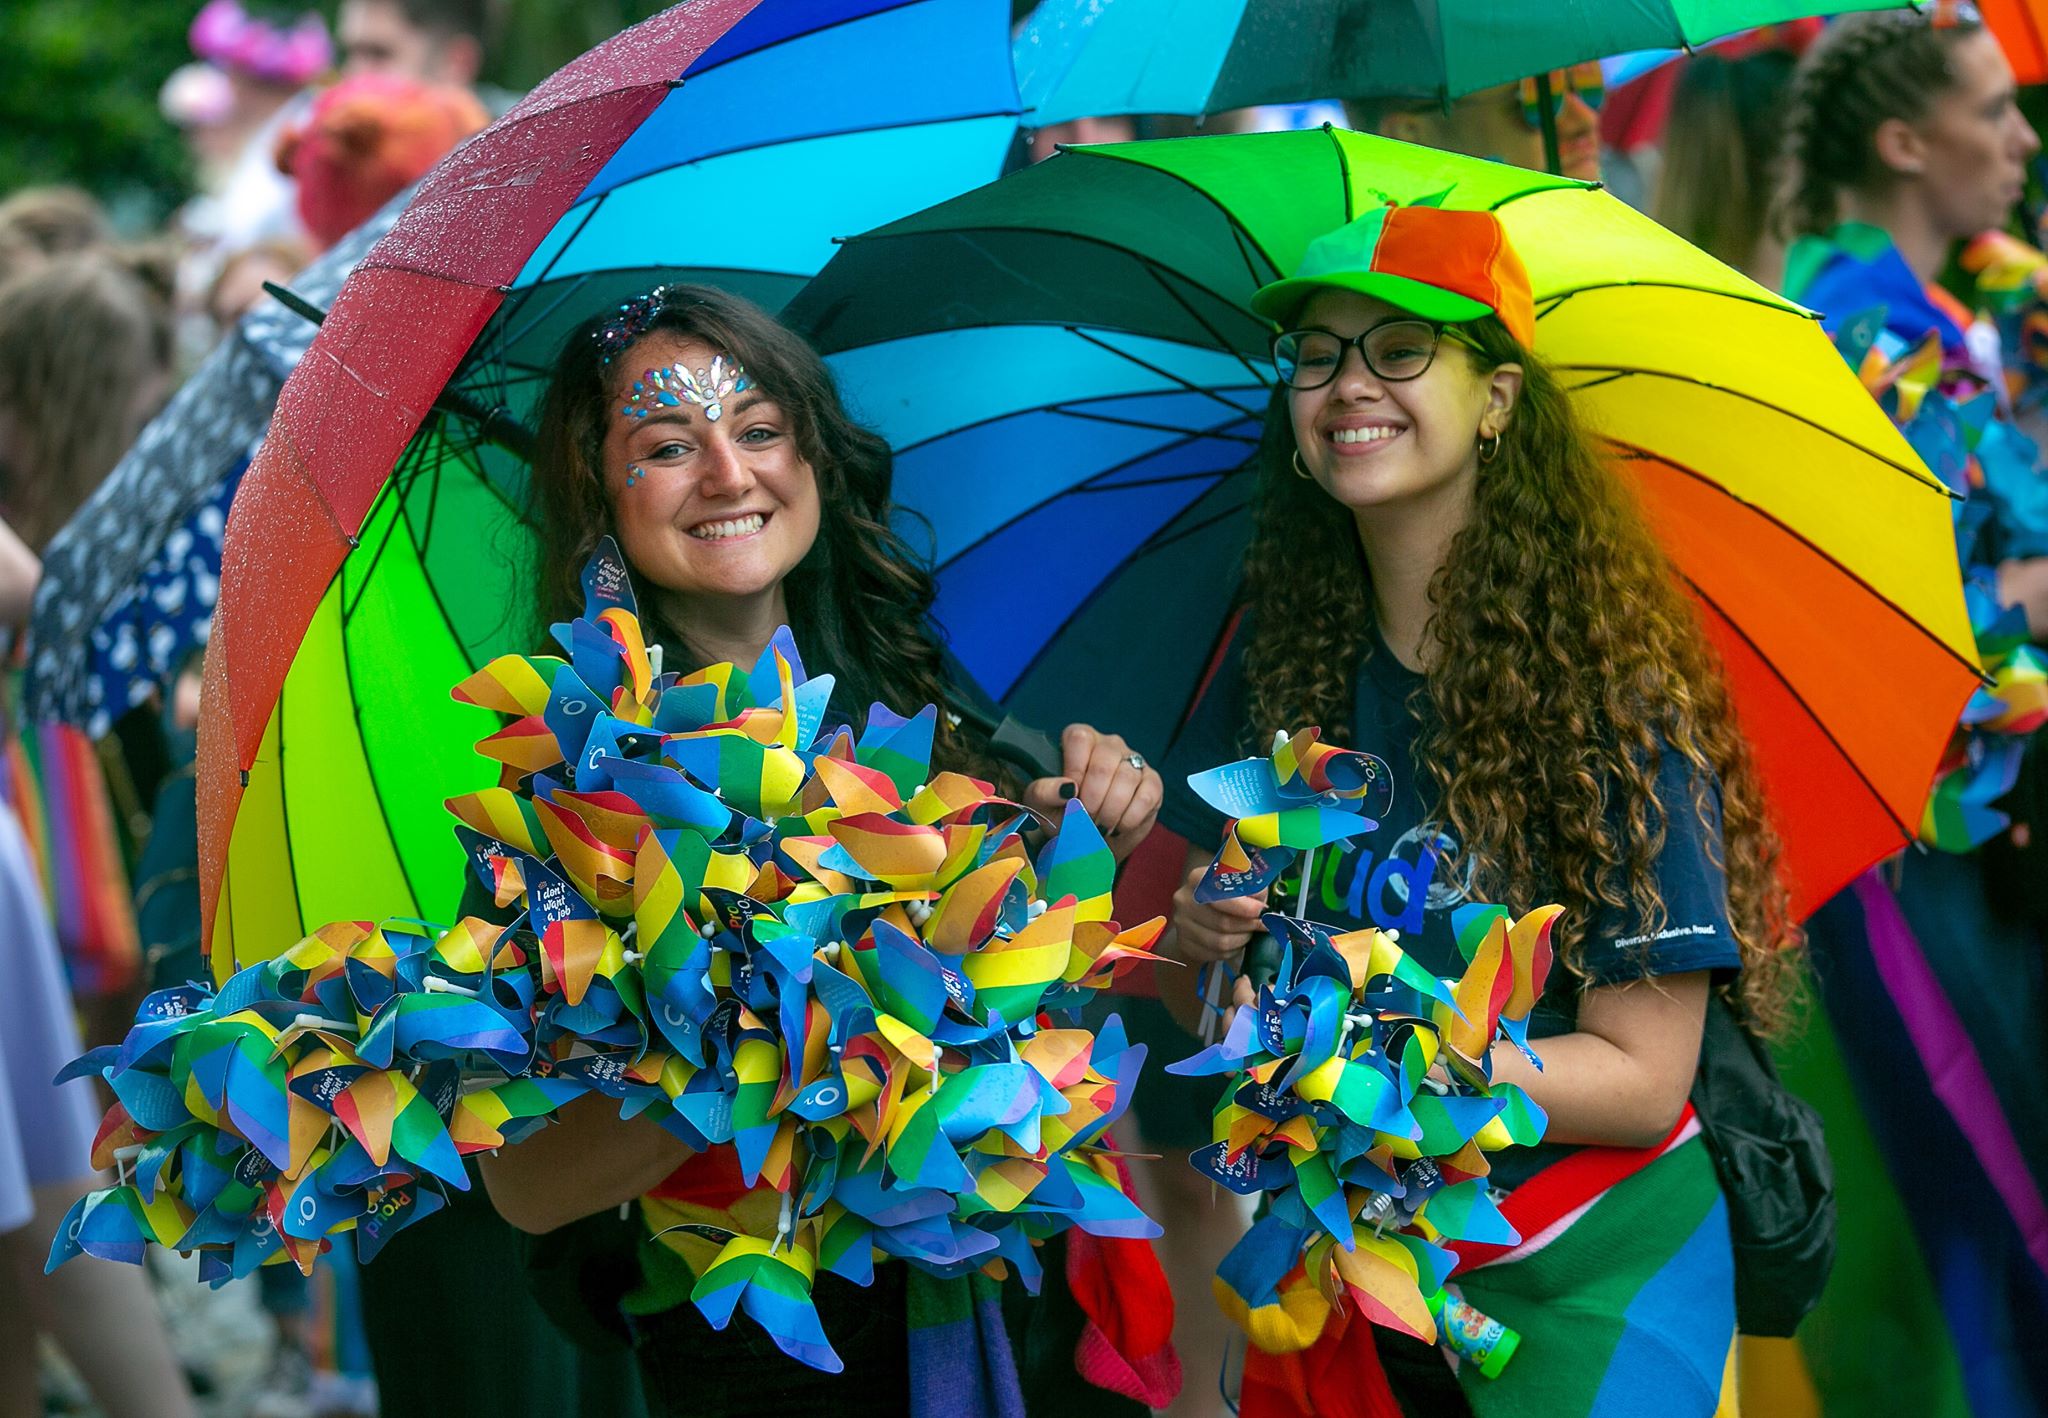 Two girls with long hair, one with face paint, under multi coloured rainbow umbrellas holding multicoloured giant flowers